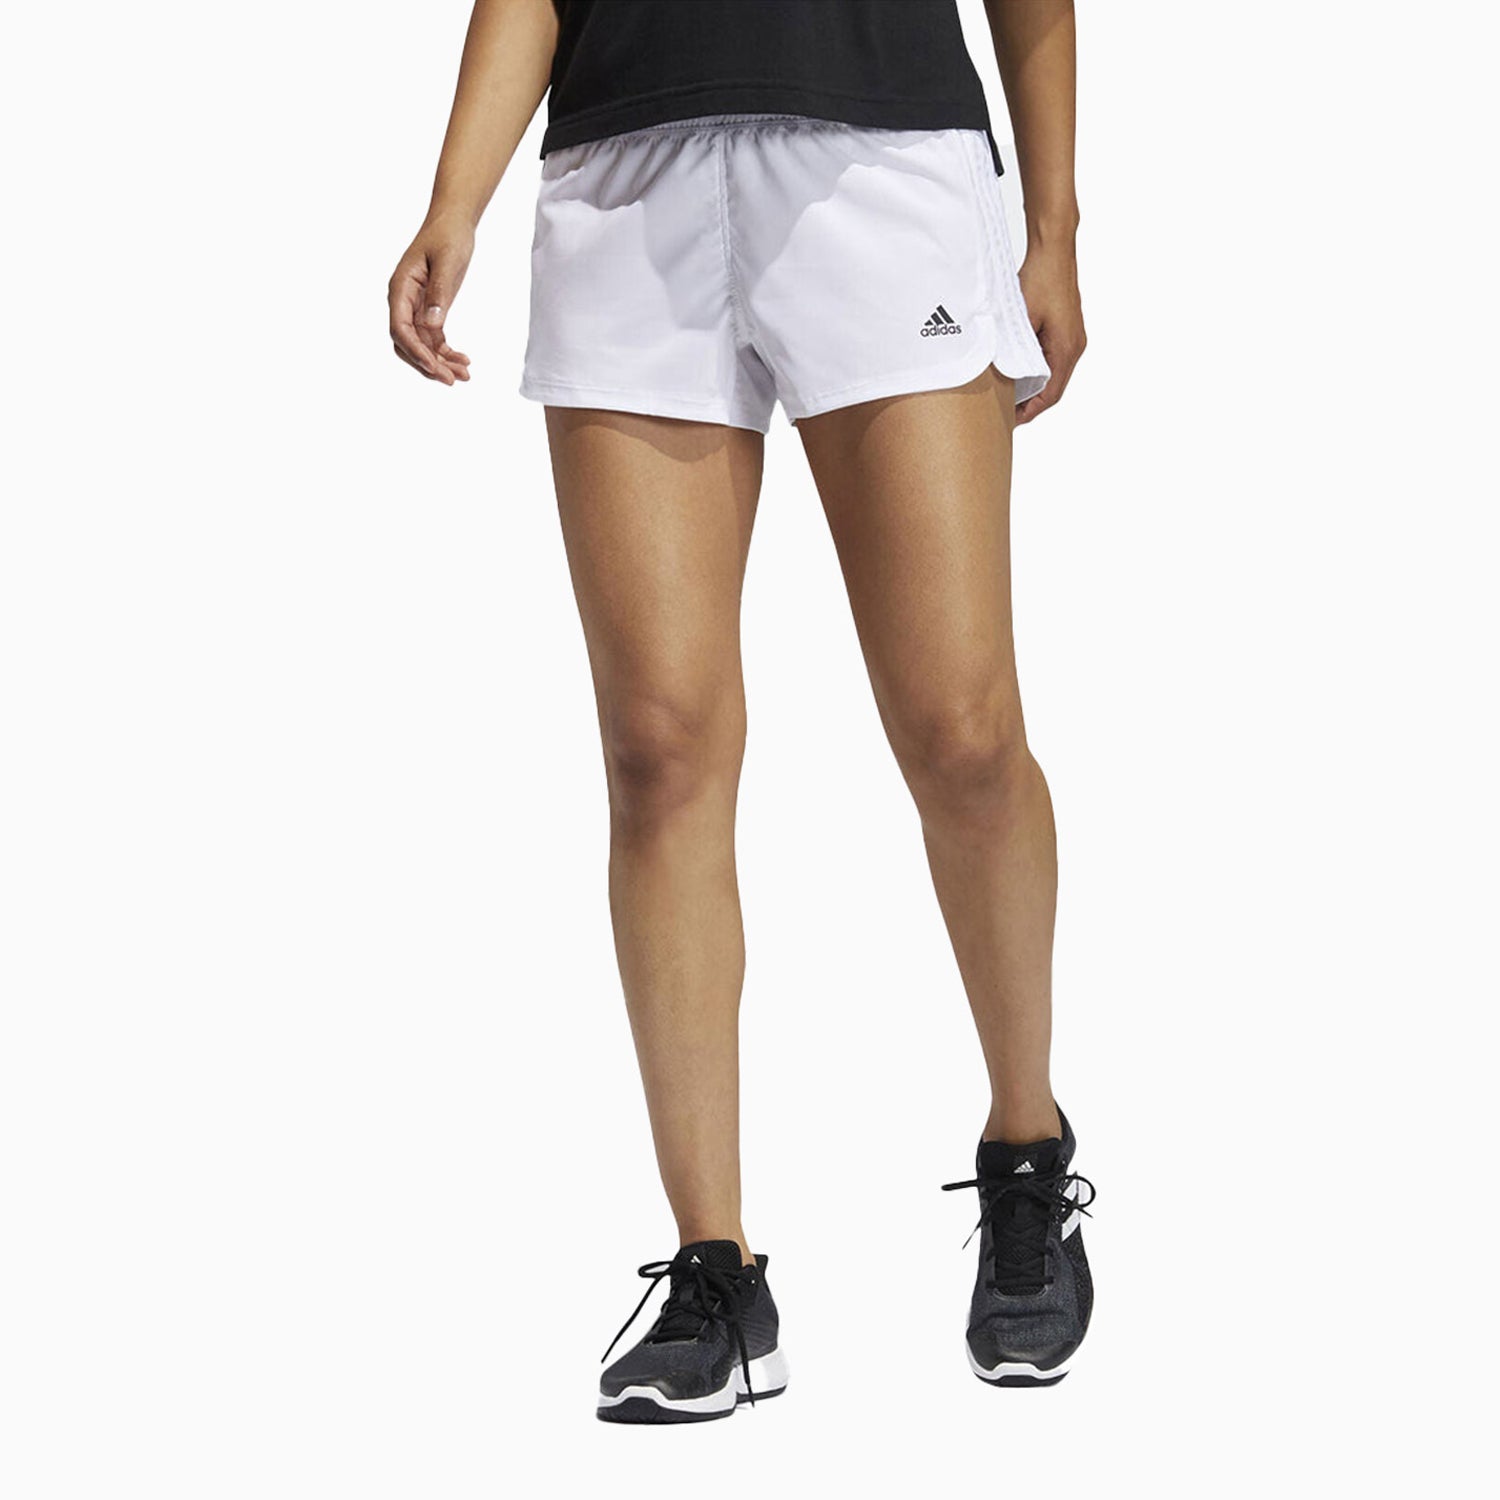 adidas-womens-pacer-3-stripes-woven-shorts-gm4260